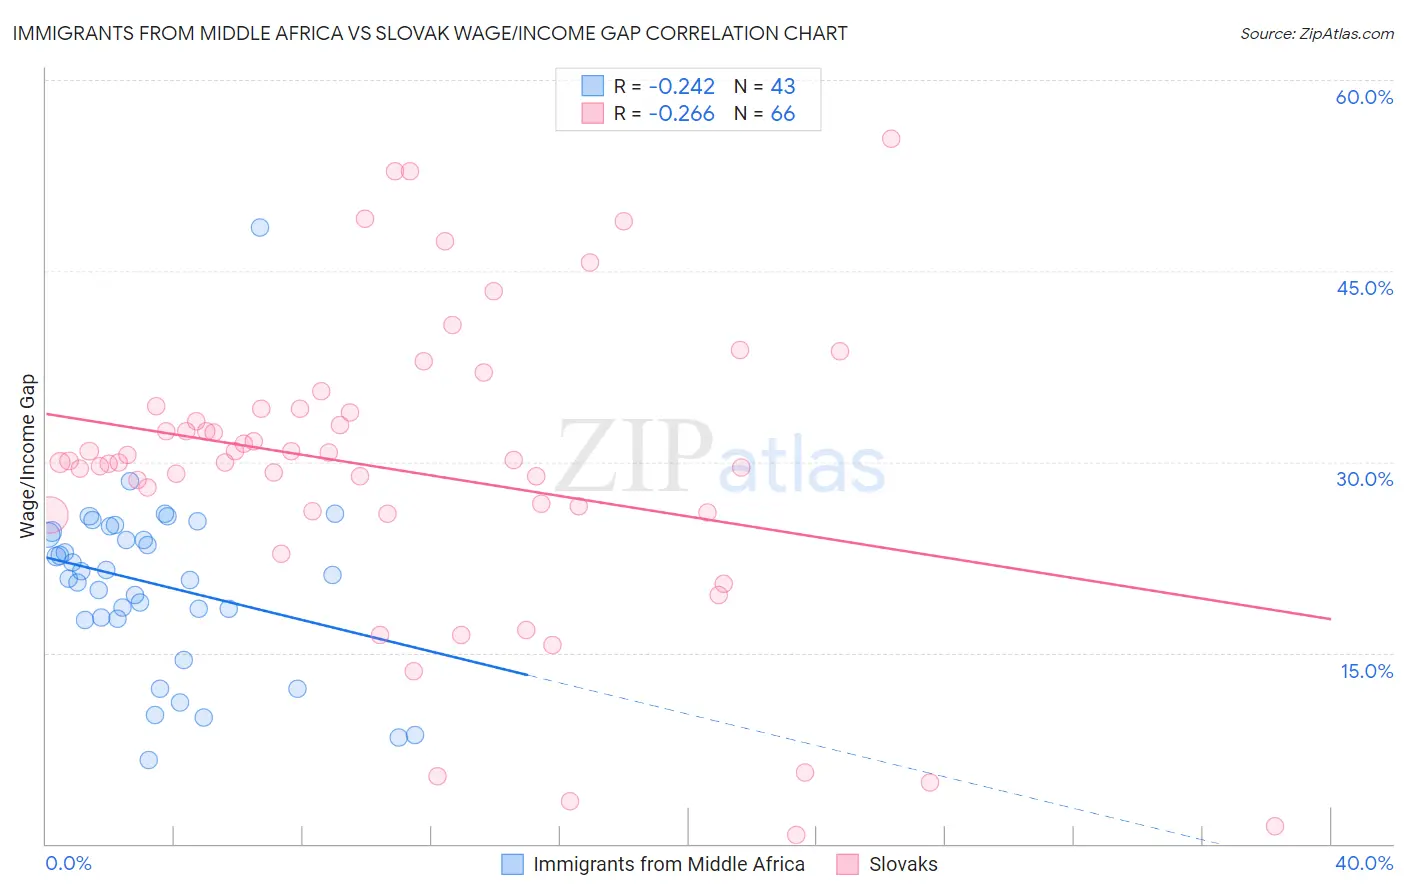 Immigrants from Middle Africa vs Slovak Wage/Income Gap